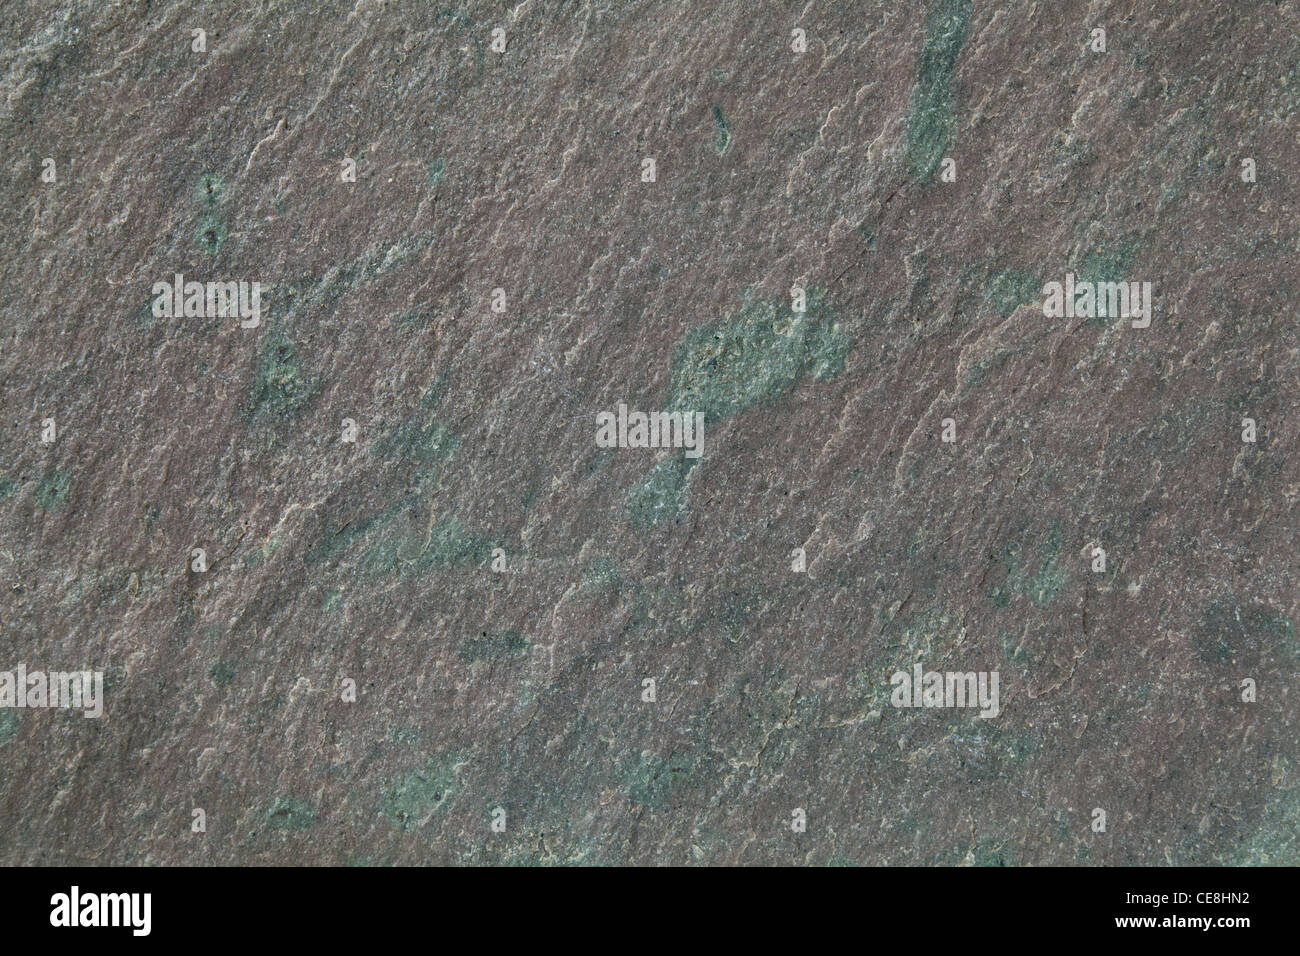 flat, gray, fine-grained, foliated slate rock with purple tint and green spots and veins Stock Photo